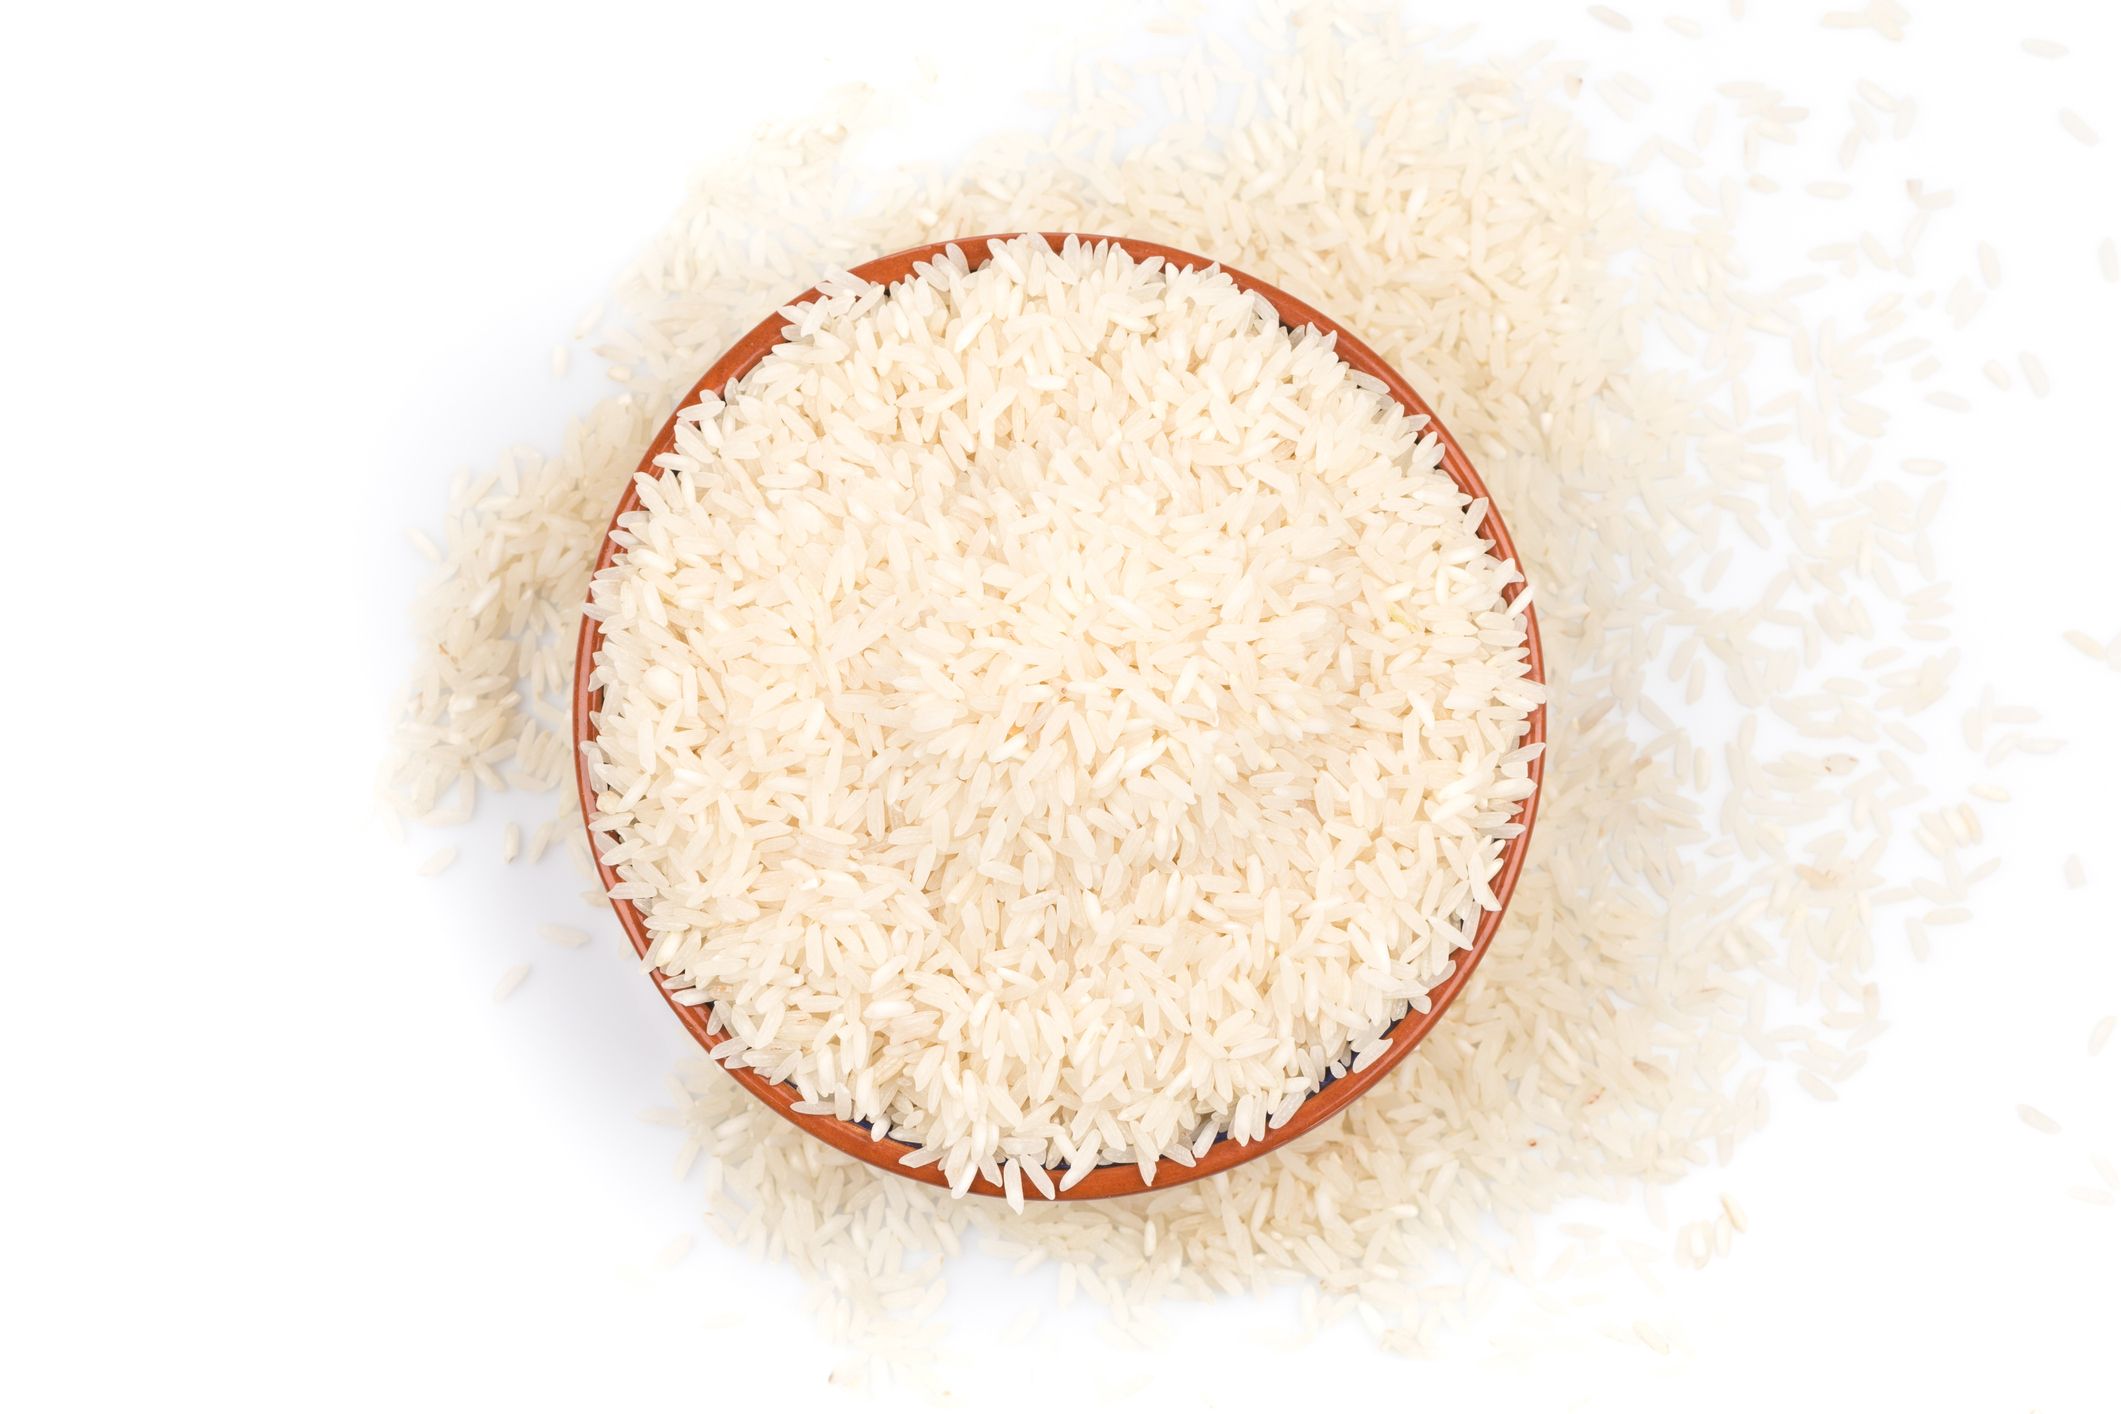 How to Cook Rice Perfectly on the Stove, Microwave or Crockpot